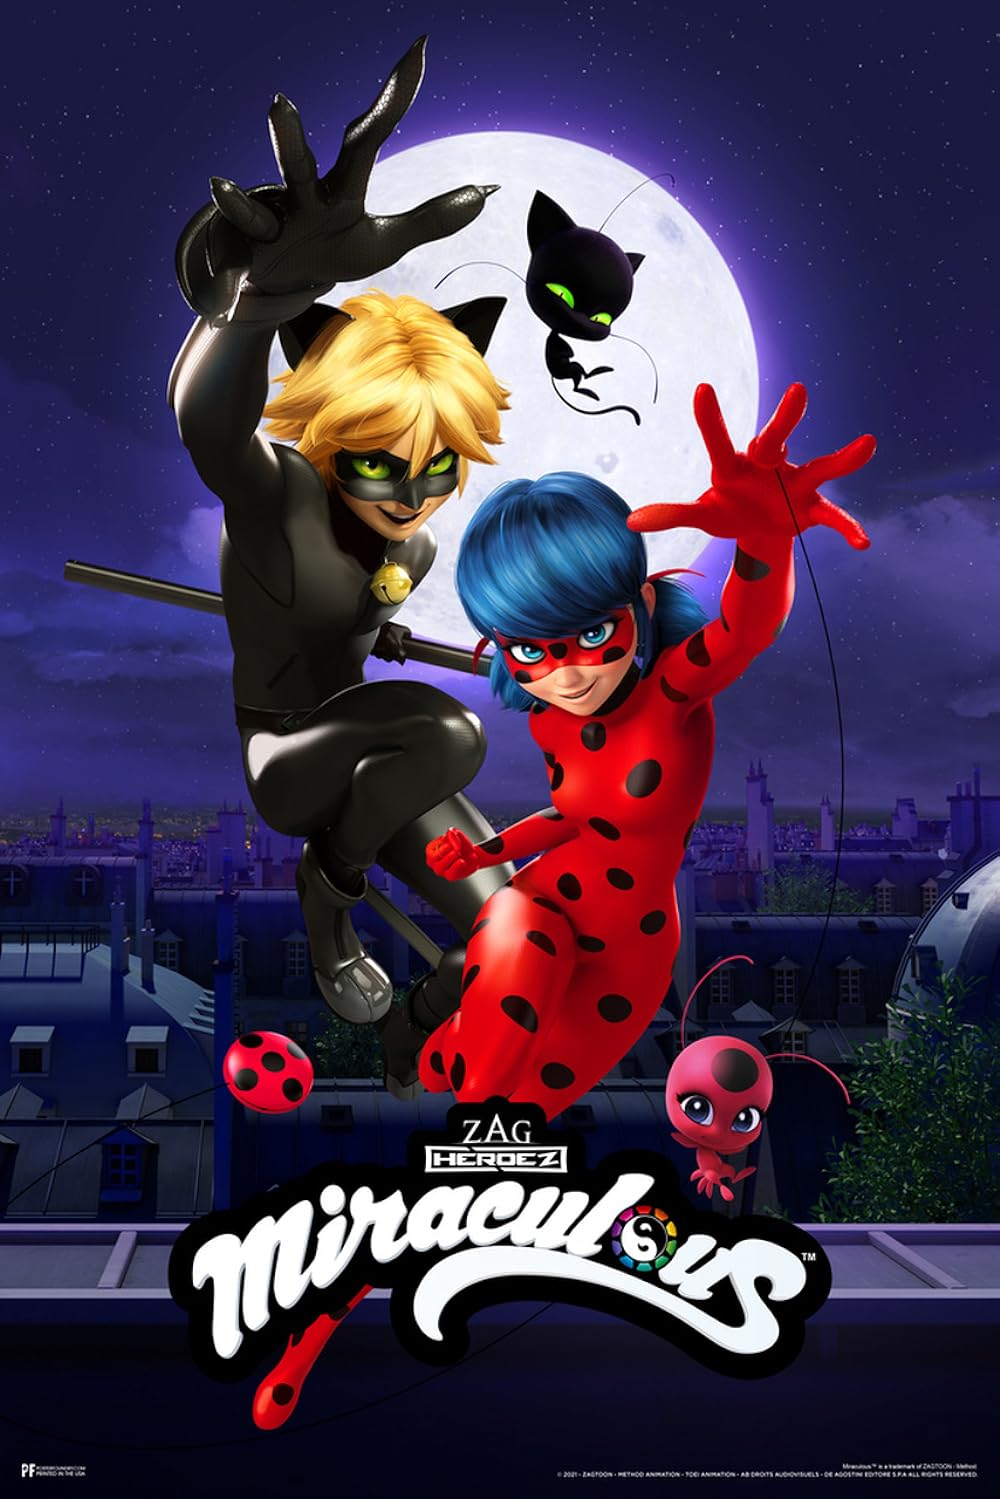 ameera mero recommends Pics Of Ladybug From Miraculous